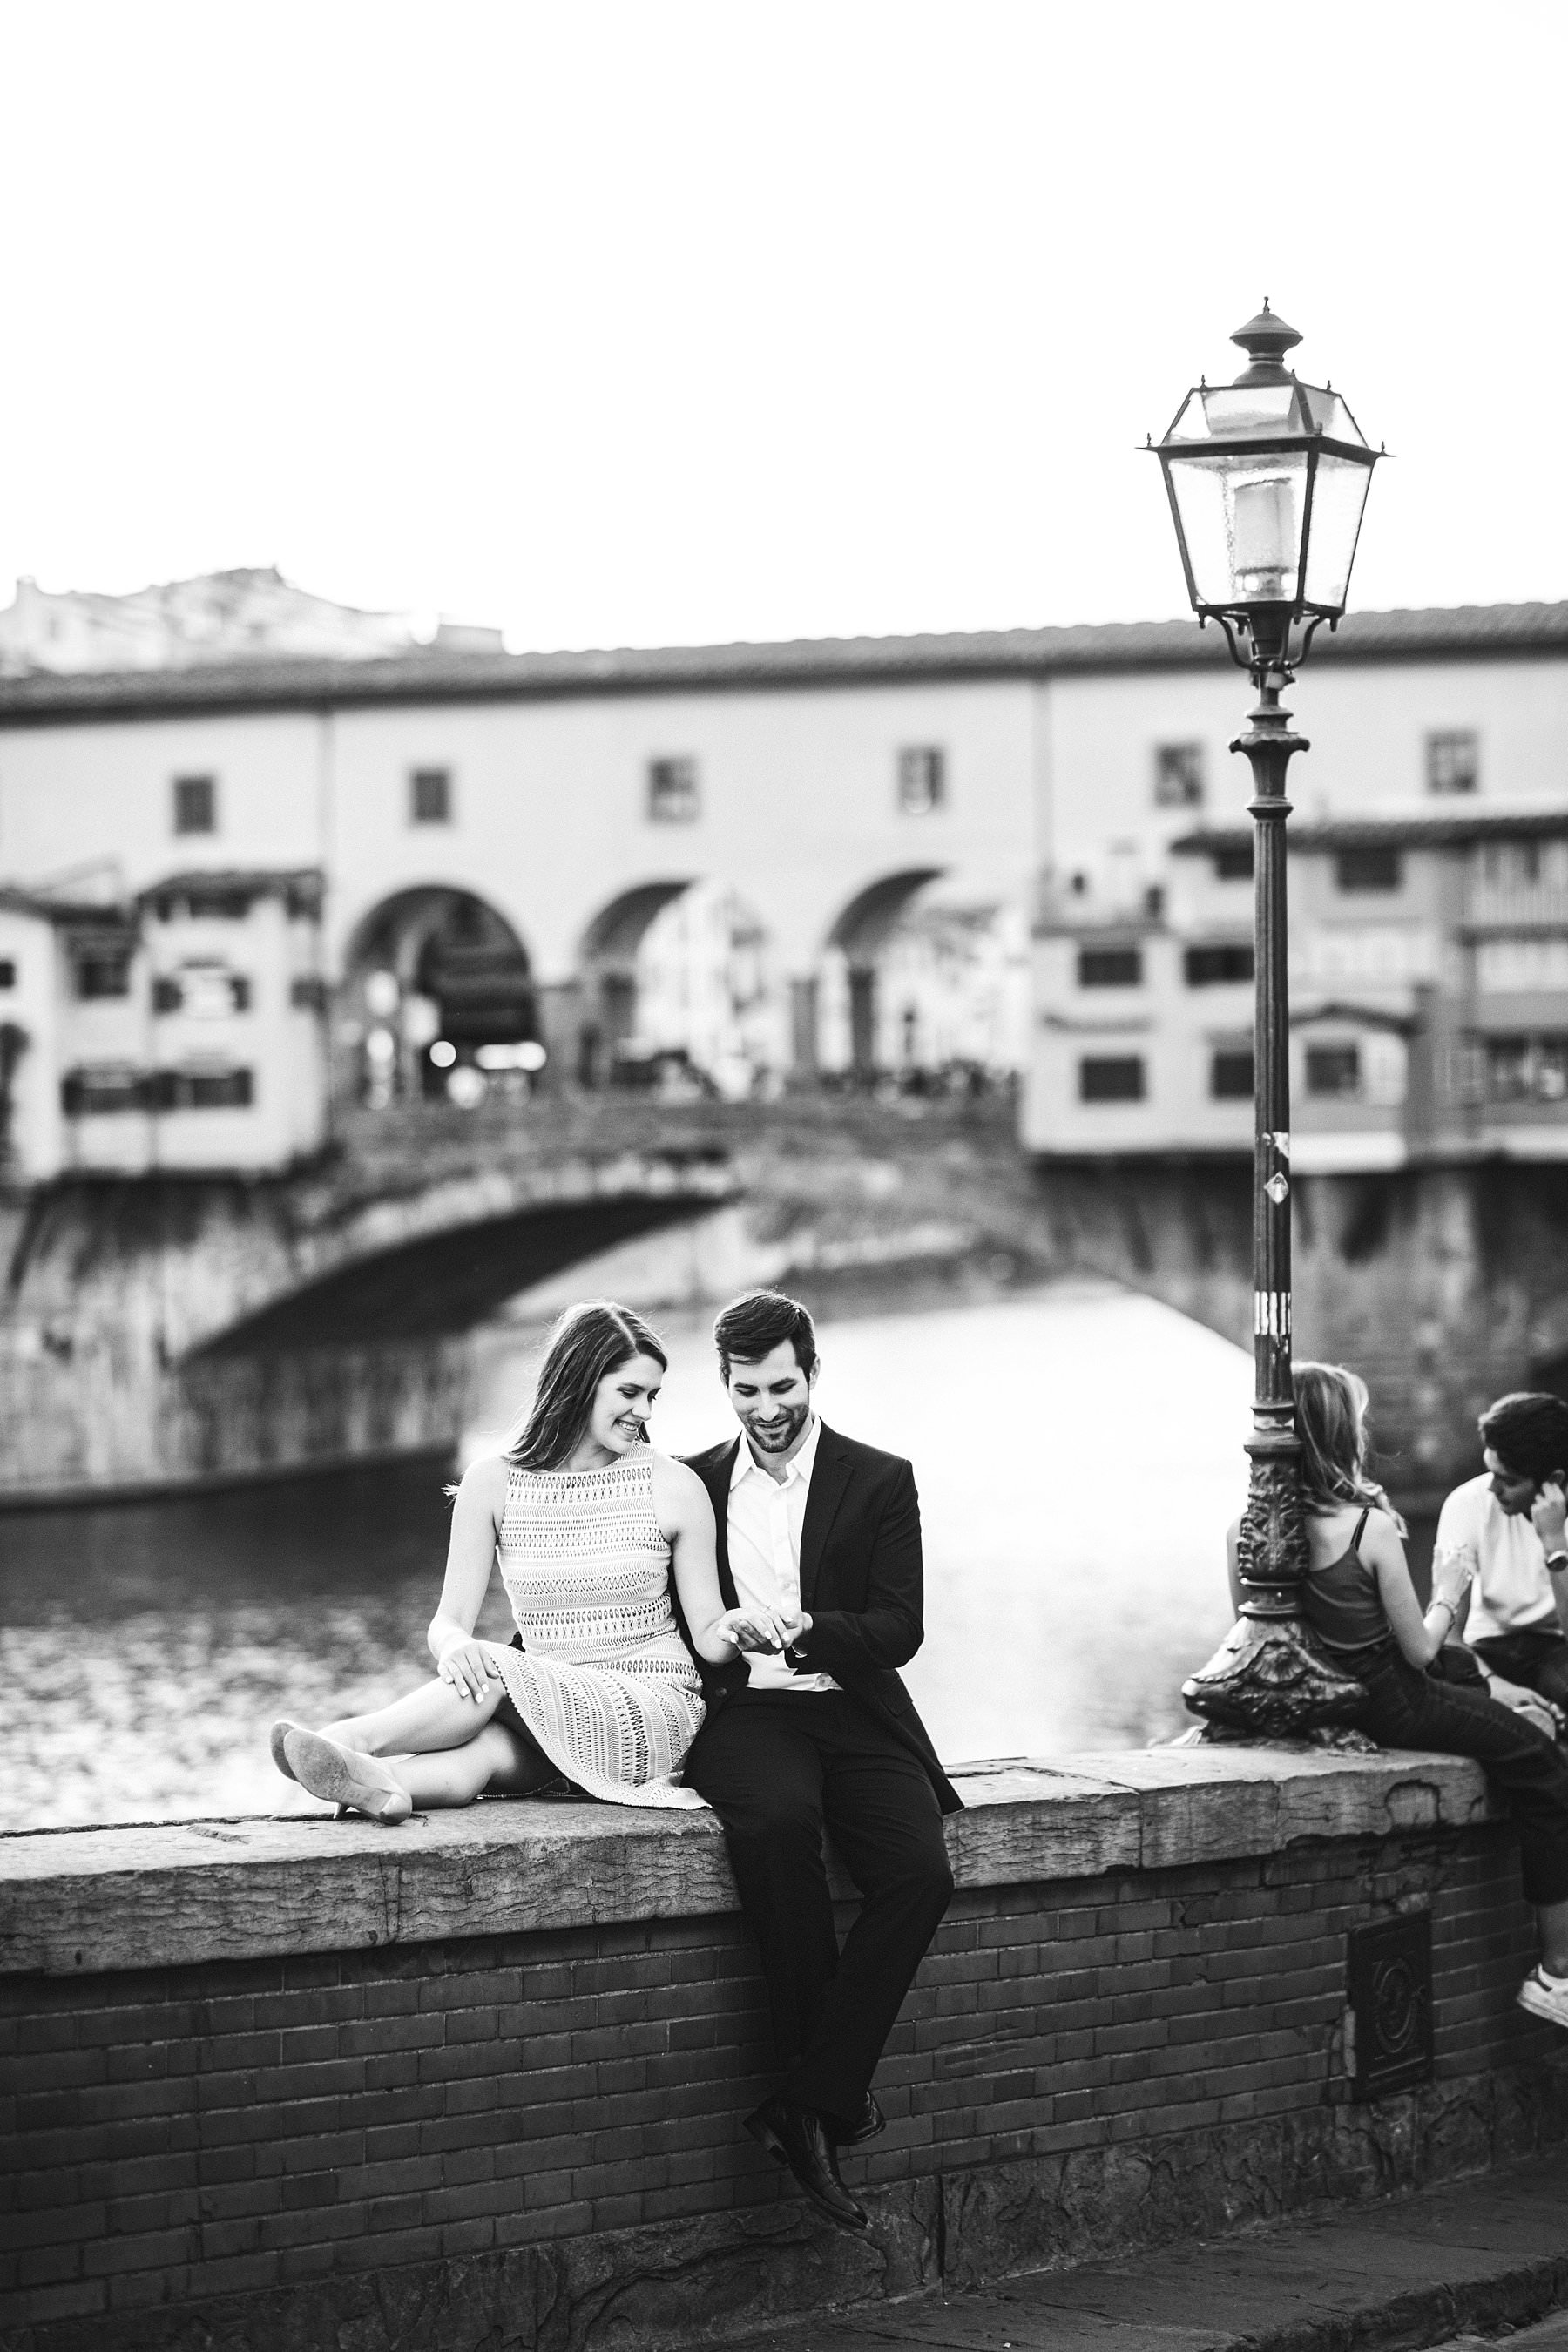 A sunset photoshoot to cherish your engagement forever. Some moments in life deserve to be celebrated in a special way. A way that makes them even more unique and unforgettable. That’s the case of a birth, a family milestone, a wedding, or an engagement. And what’s better than a sunset photoshoot in an incredible city like Florence, to honor such an occasion? Considered the cradle of the Renaissance, Florence is full of fascinating spots that work perfectly as settings for a sunset photoshoot. Its very heart, where white marble statues give way to wooden portals and to the intricately decorated façades of historic churches, welcomed the couple for a series of shots filled with smiles and emotions